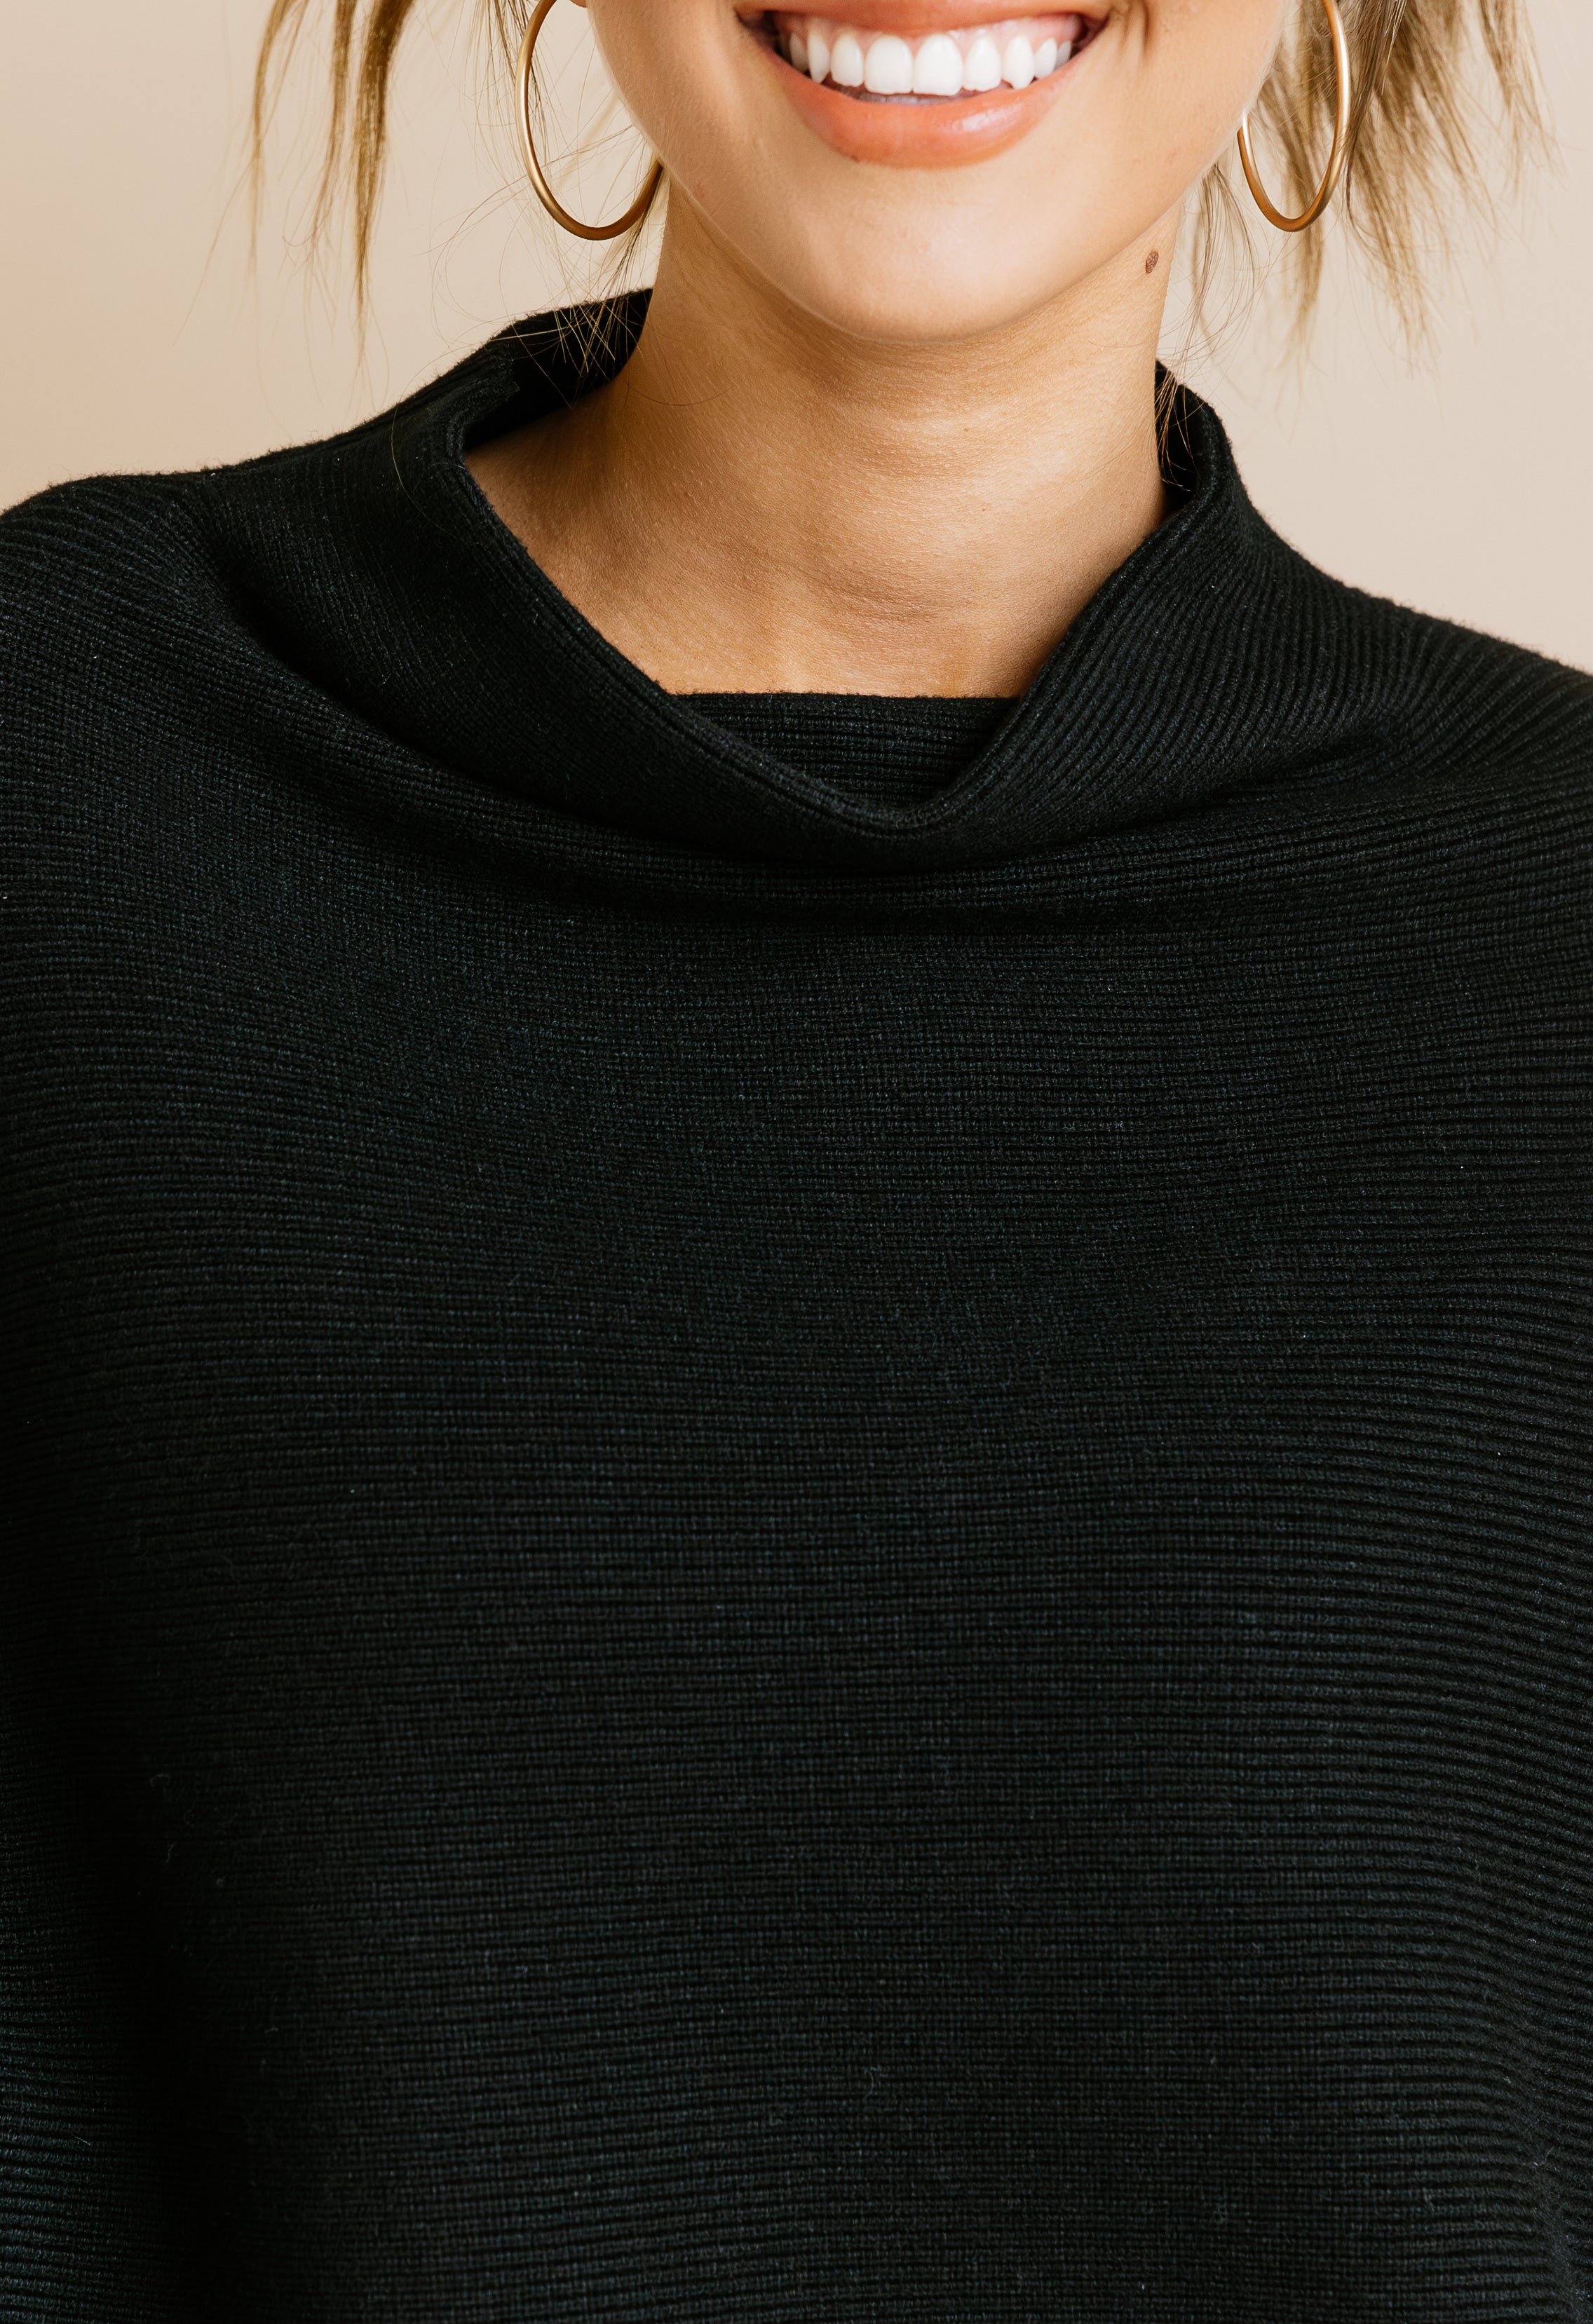 Say Hello Sweater - BLACK - willows clothing SWEATER